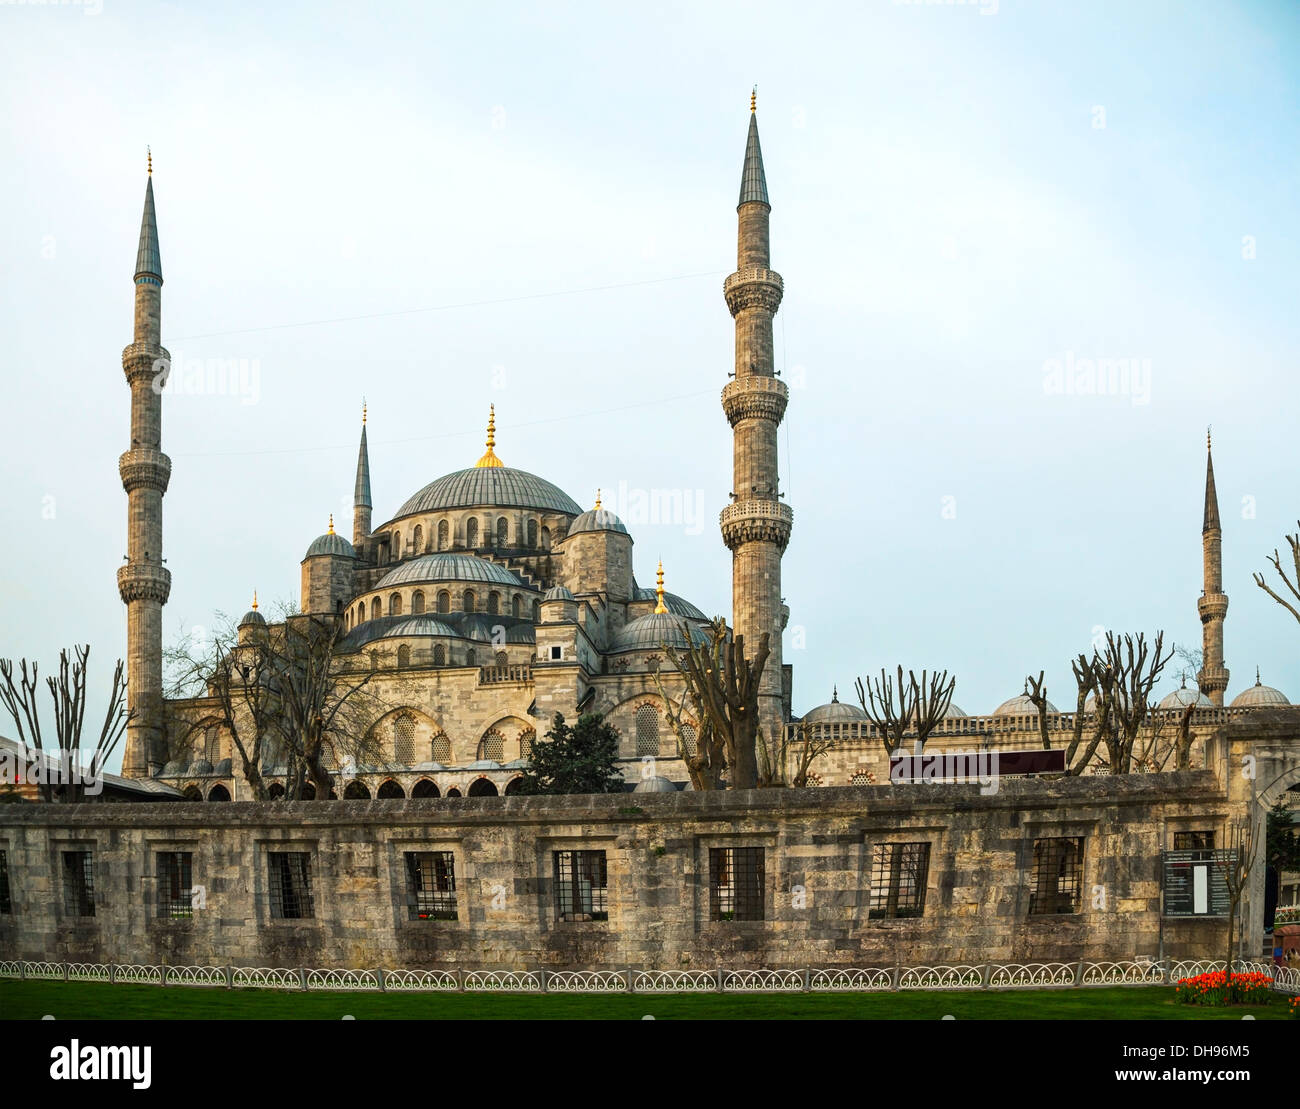 Sultan Ahmed Mosque (blaue Moschee) in Istanbul am Morgen Stockfoto